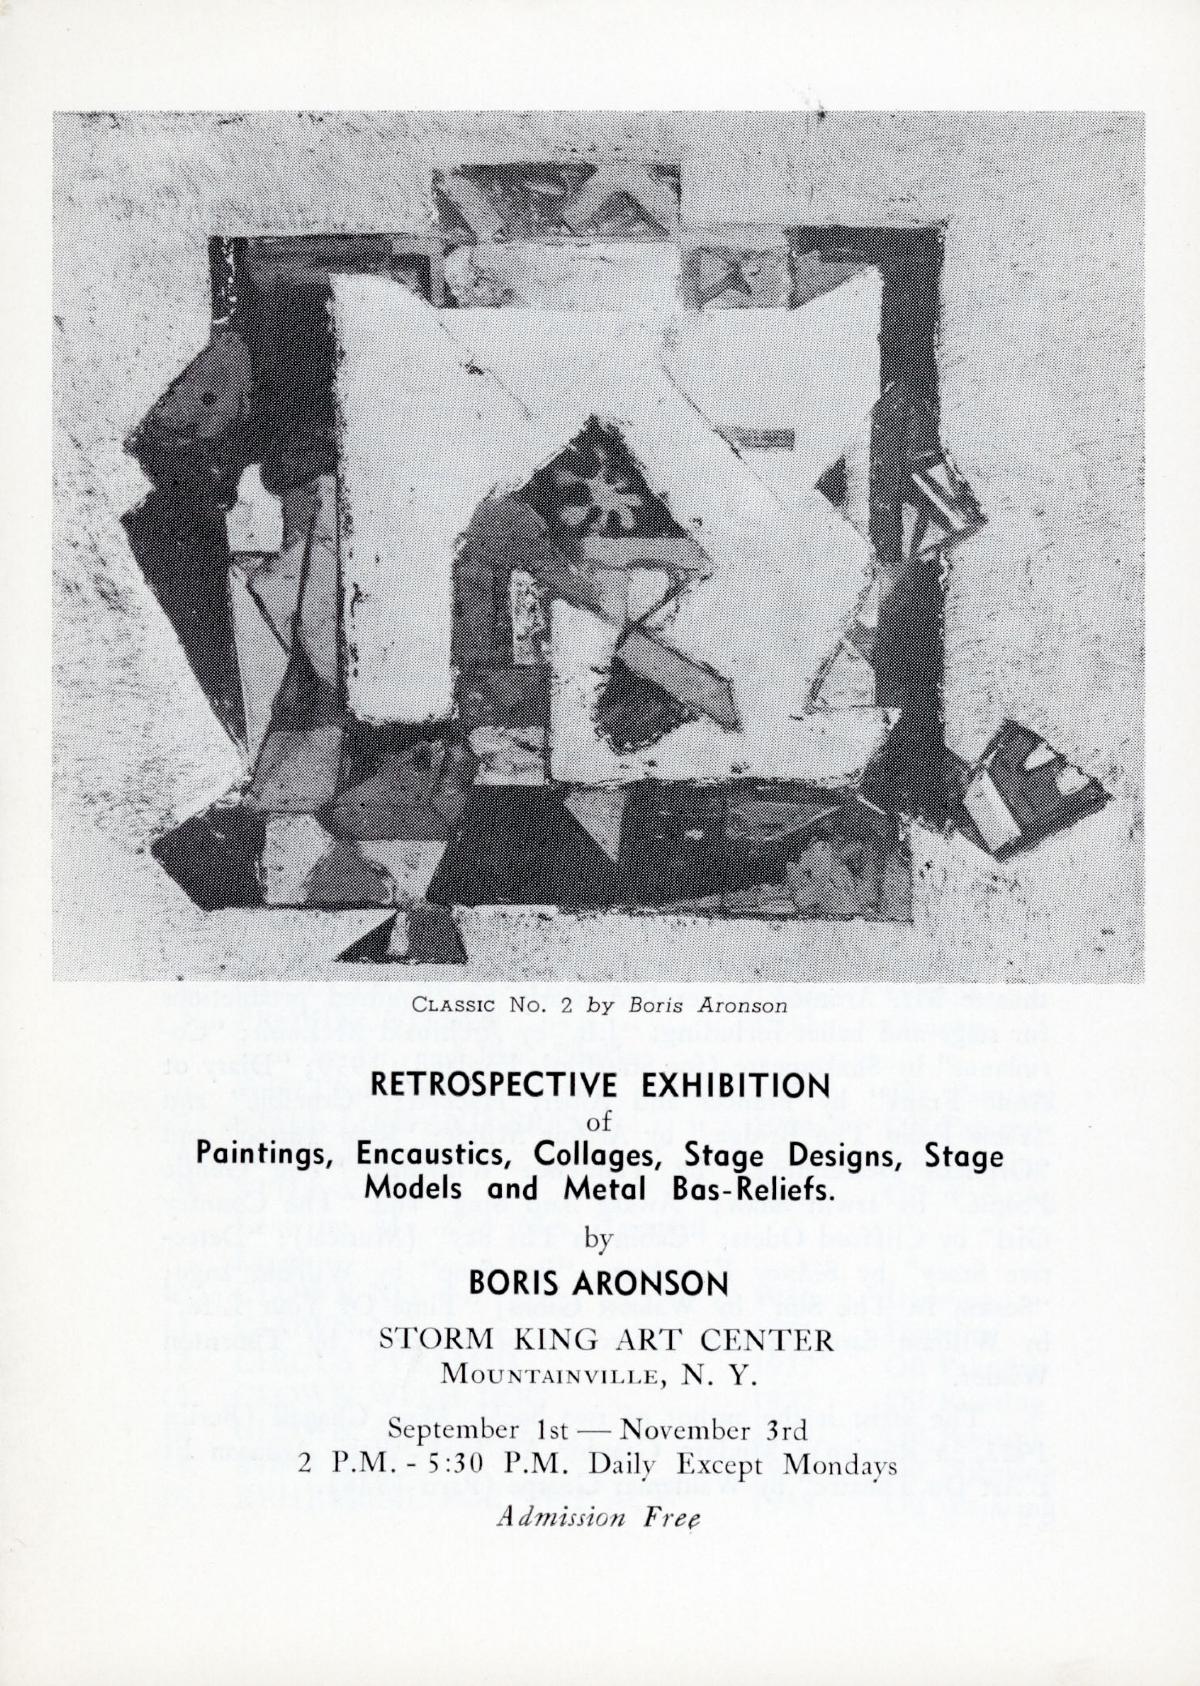 Retrospective Exhibition of Boris Aronson: Paintings, Encaustics, Collages State Designs, Stage Models and Metal Base Reliefs, September 1-November 3, 1963, catalogue cover